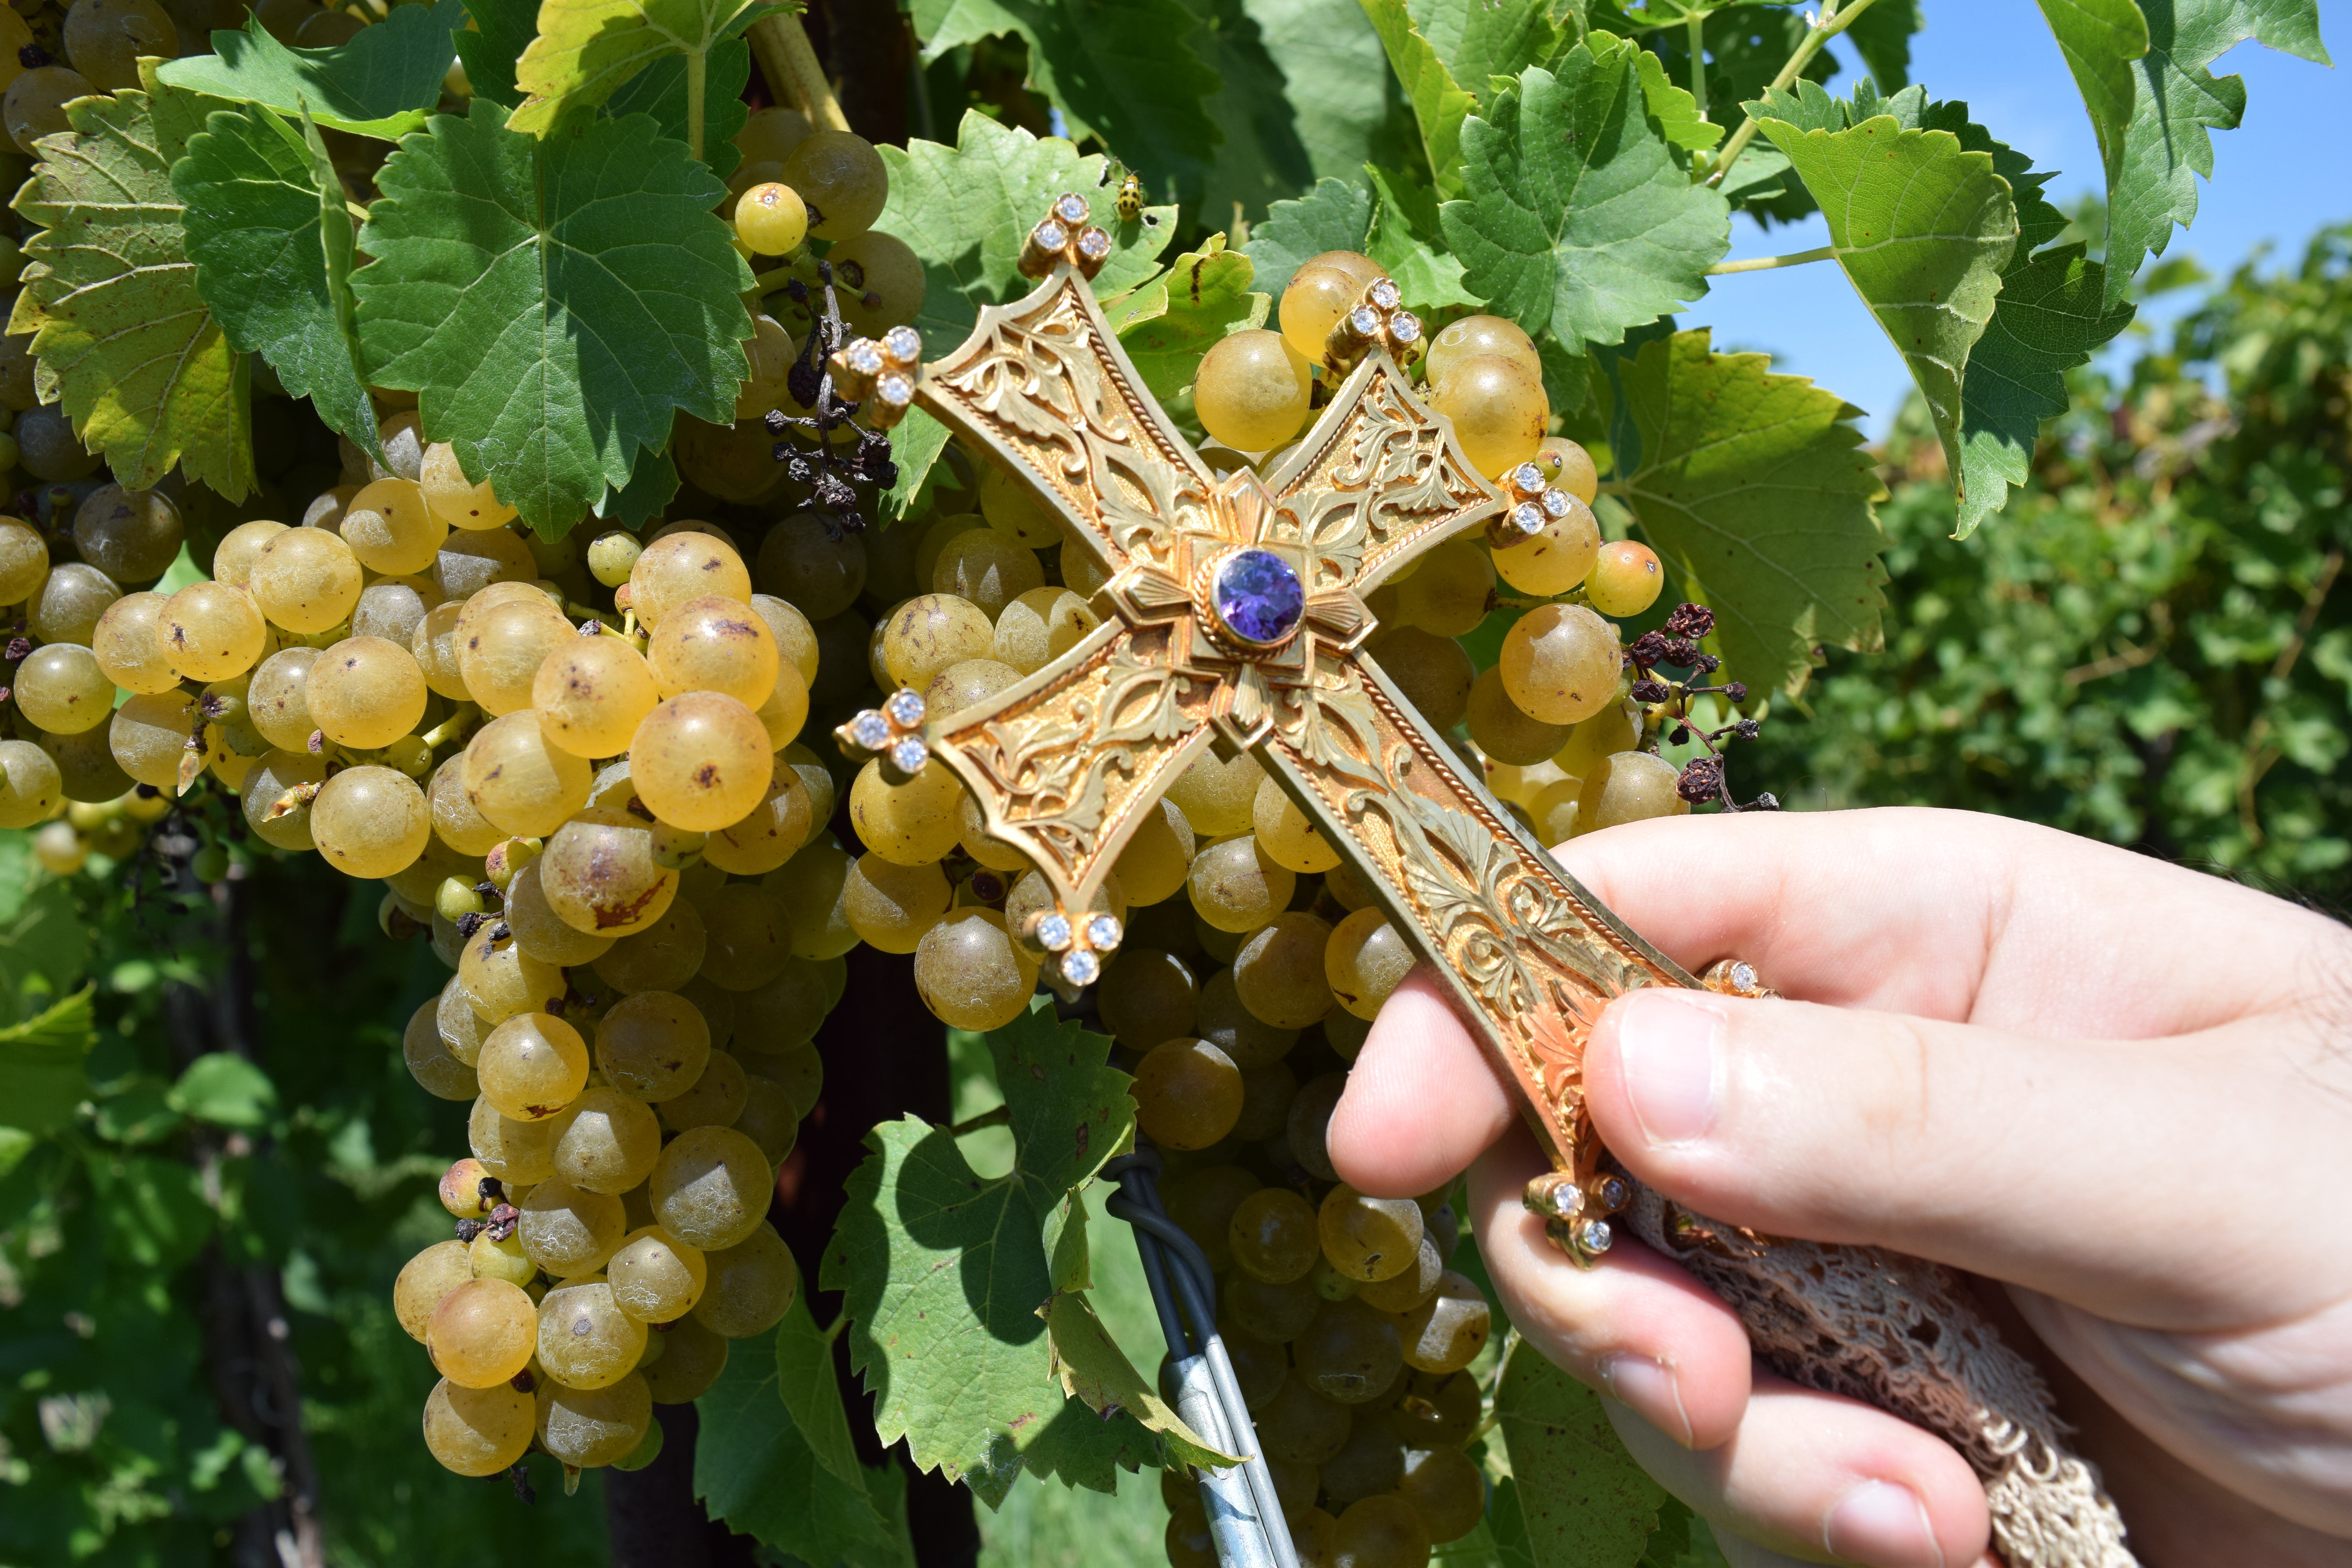 Blessing of the grapes